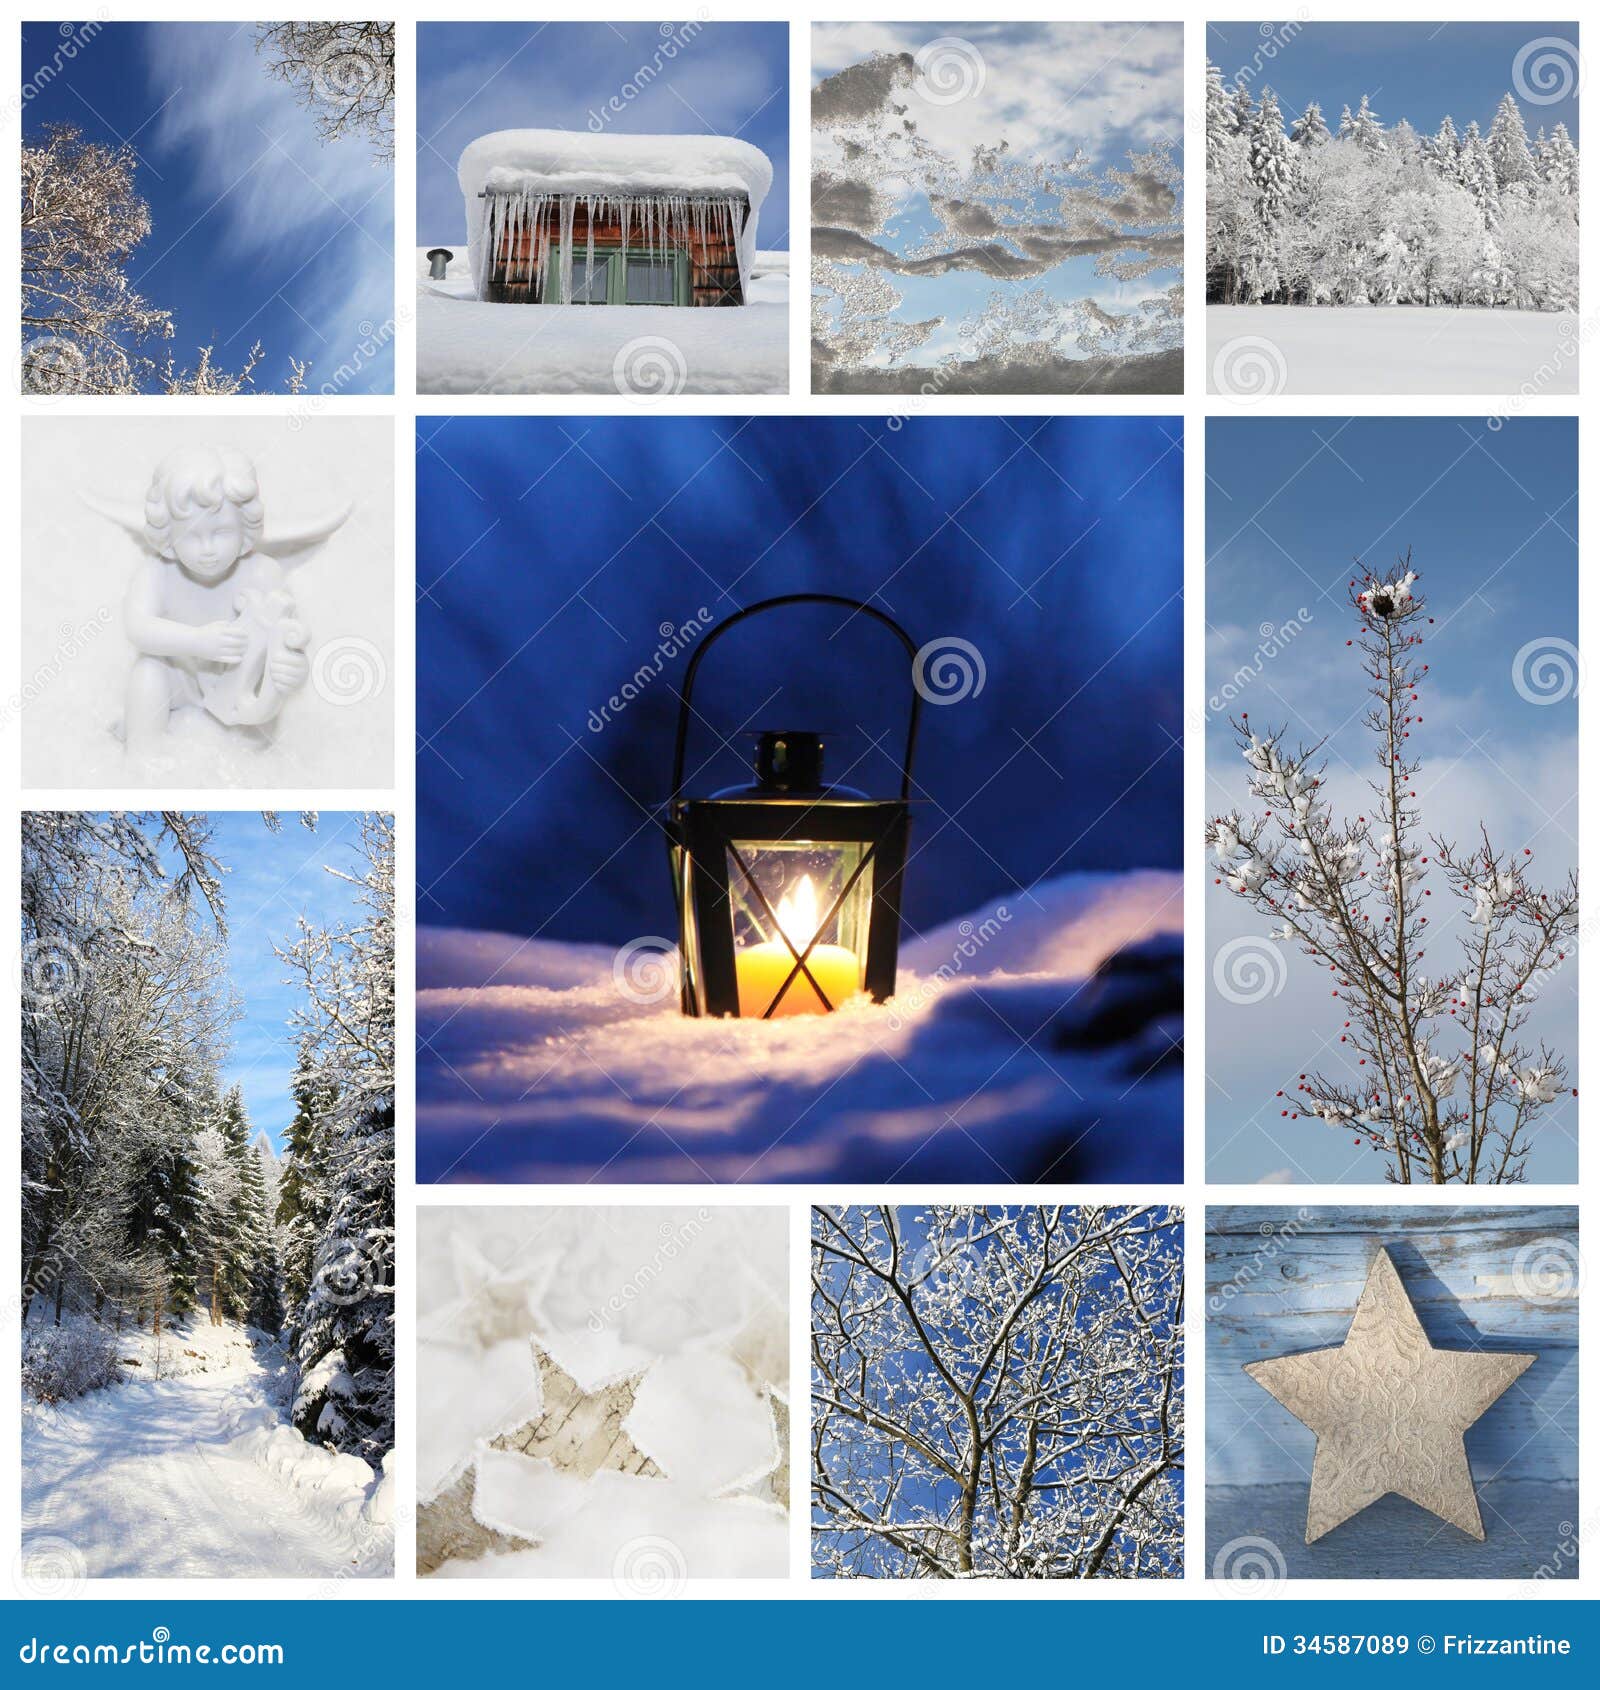 Winter Collage with Snow, Forest - Winter Season Stock Image ...